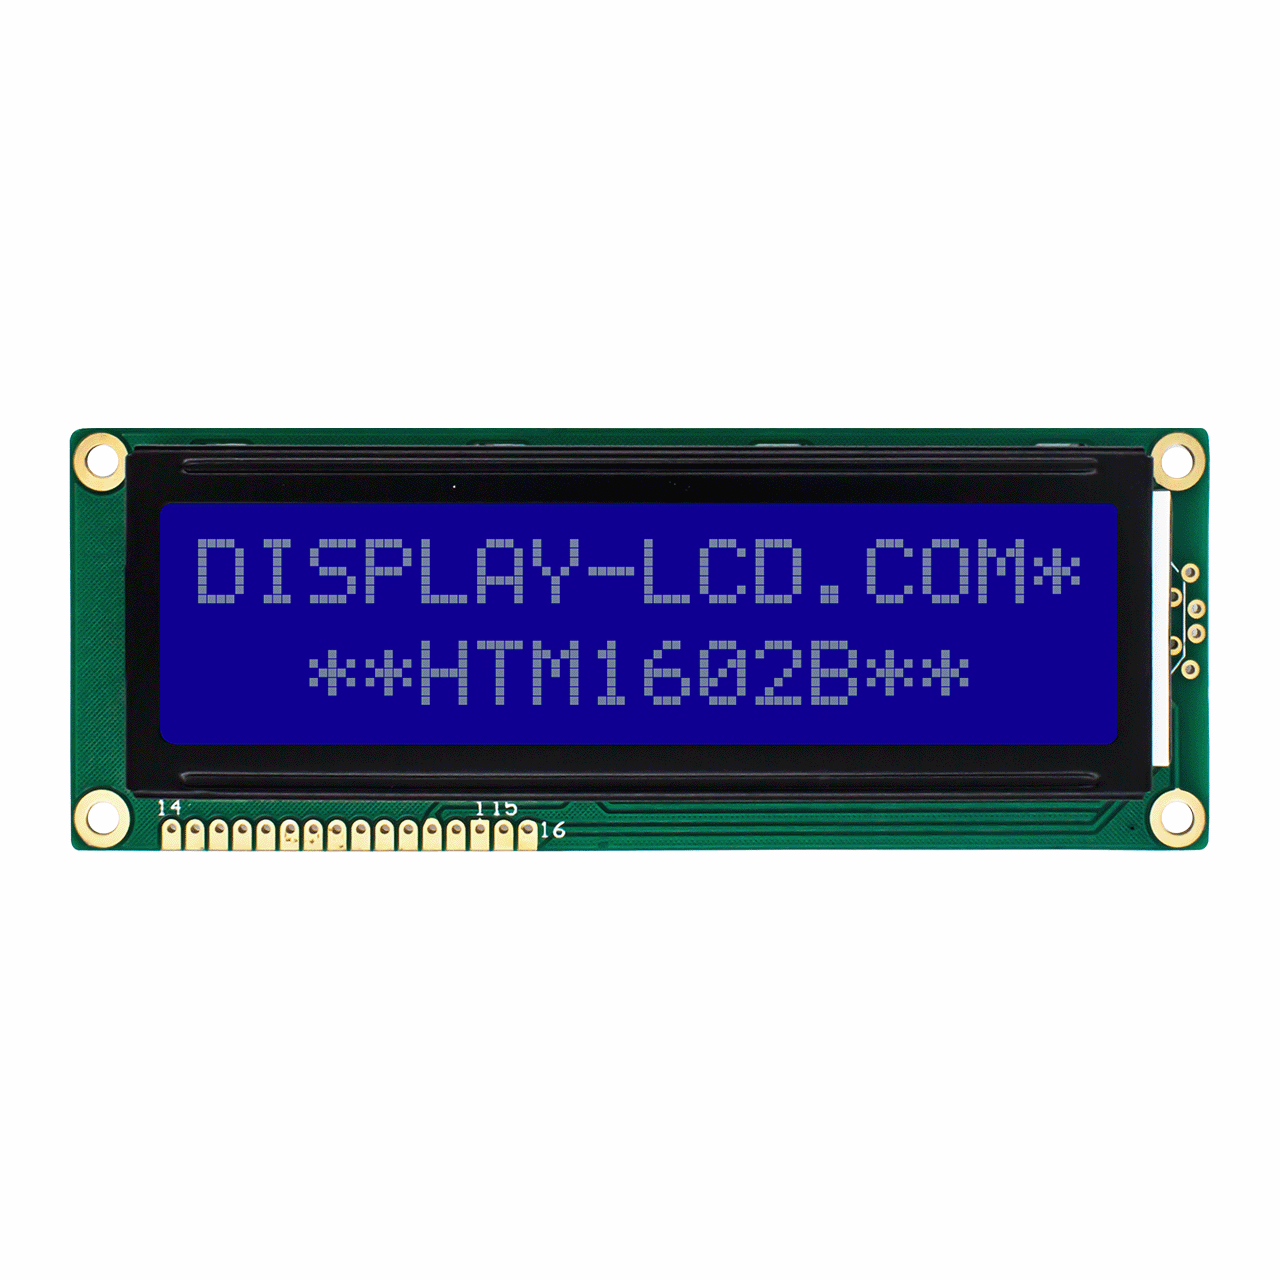 2X16 Character LCD Module Display | STN- Blue  with White Side Backlight 5.0V-Arduino